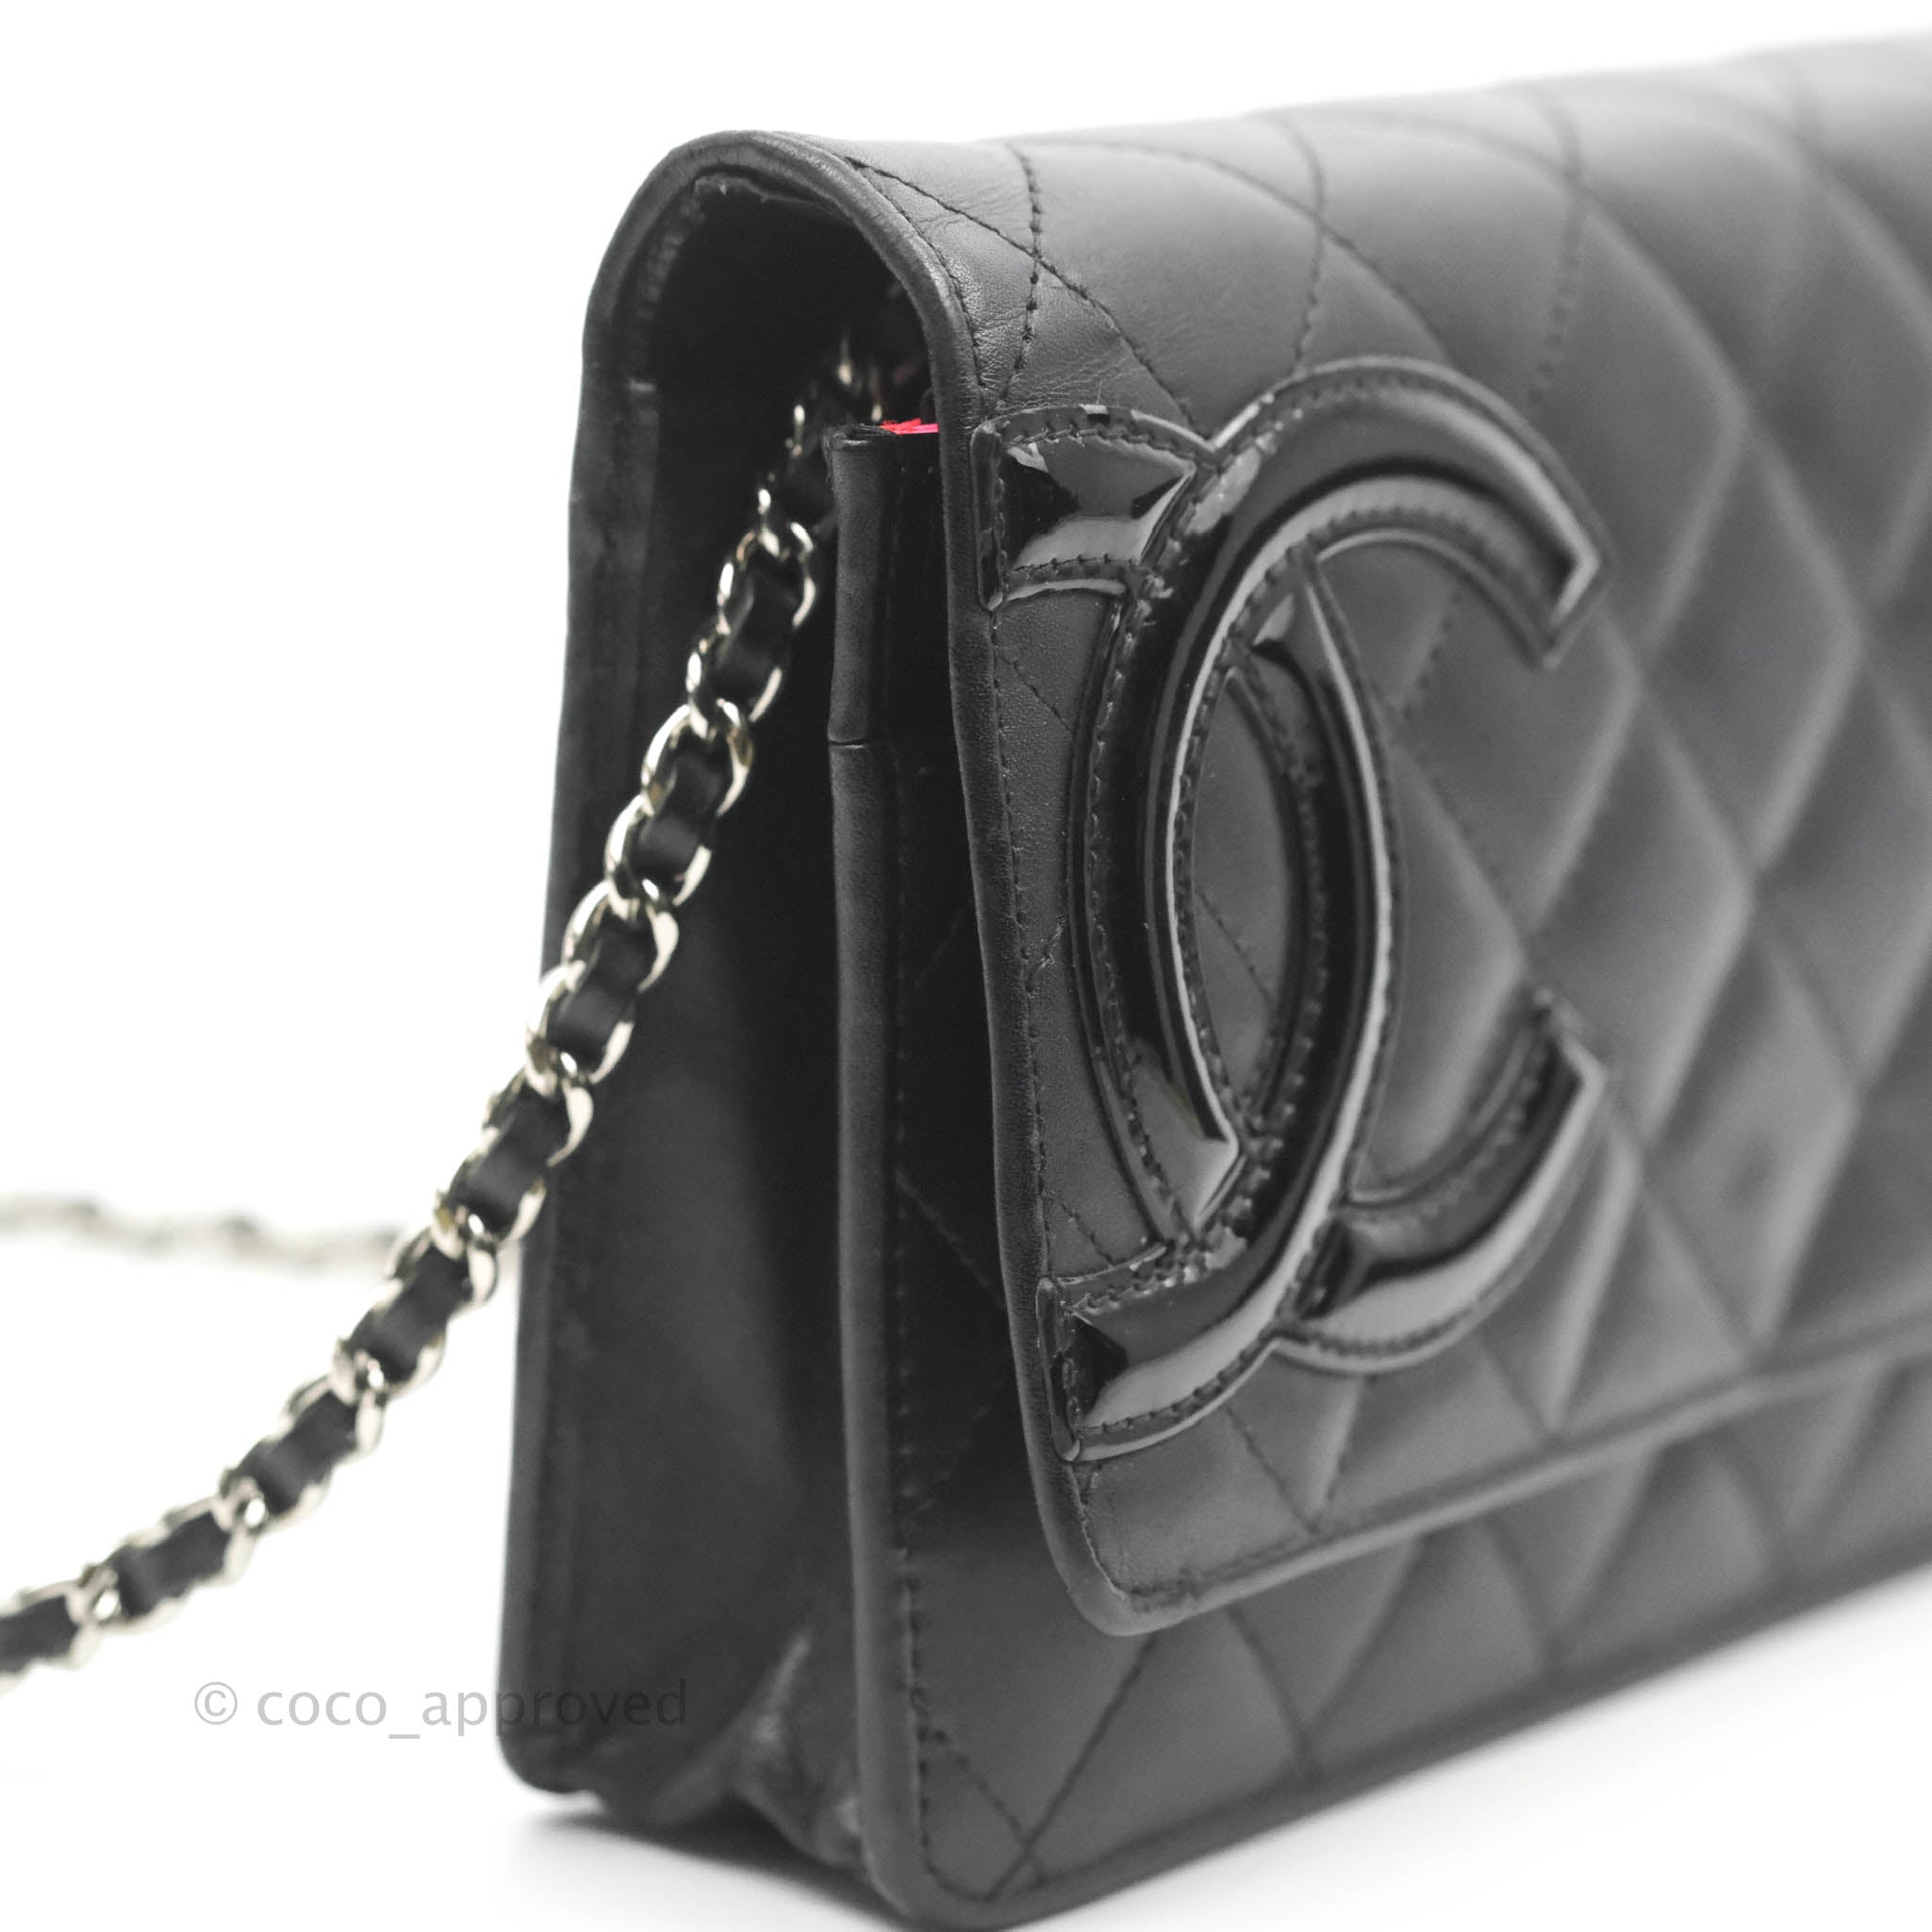 Chanel Calfskin Quilted Cambon Wallet on Chain WOC Black Silver